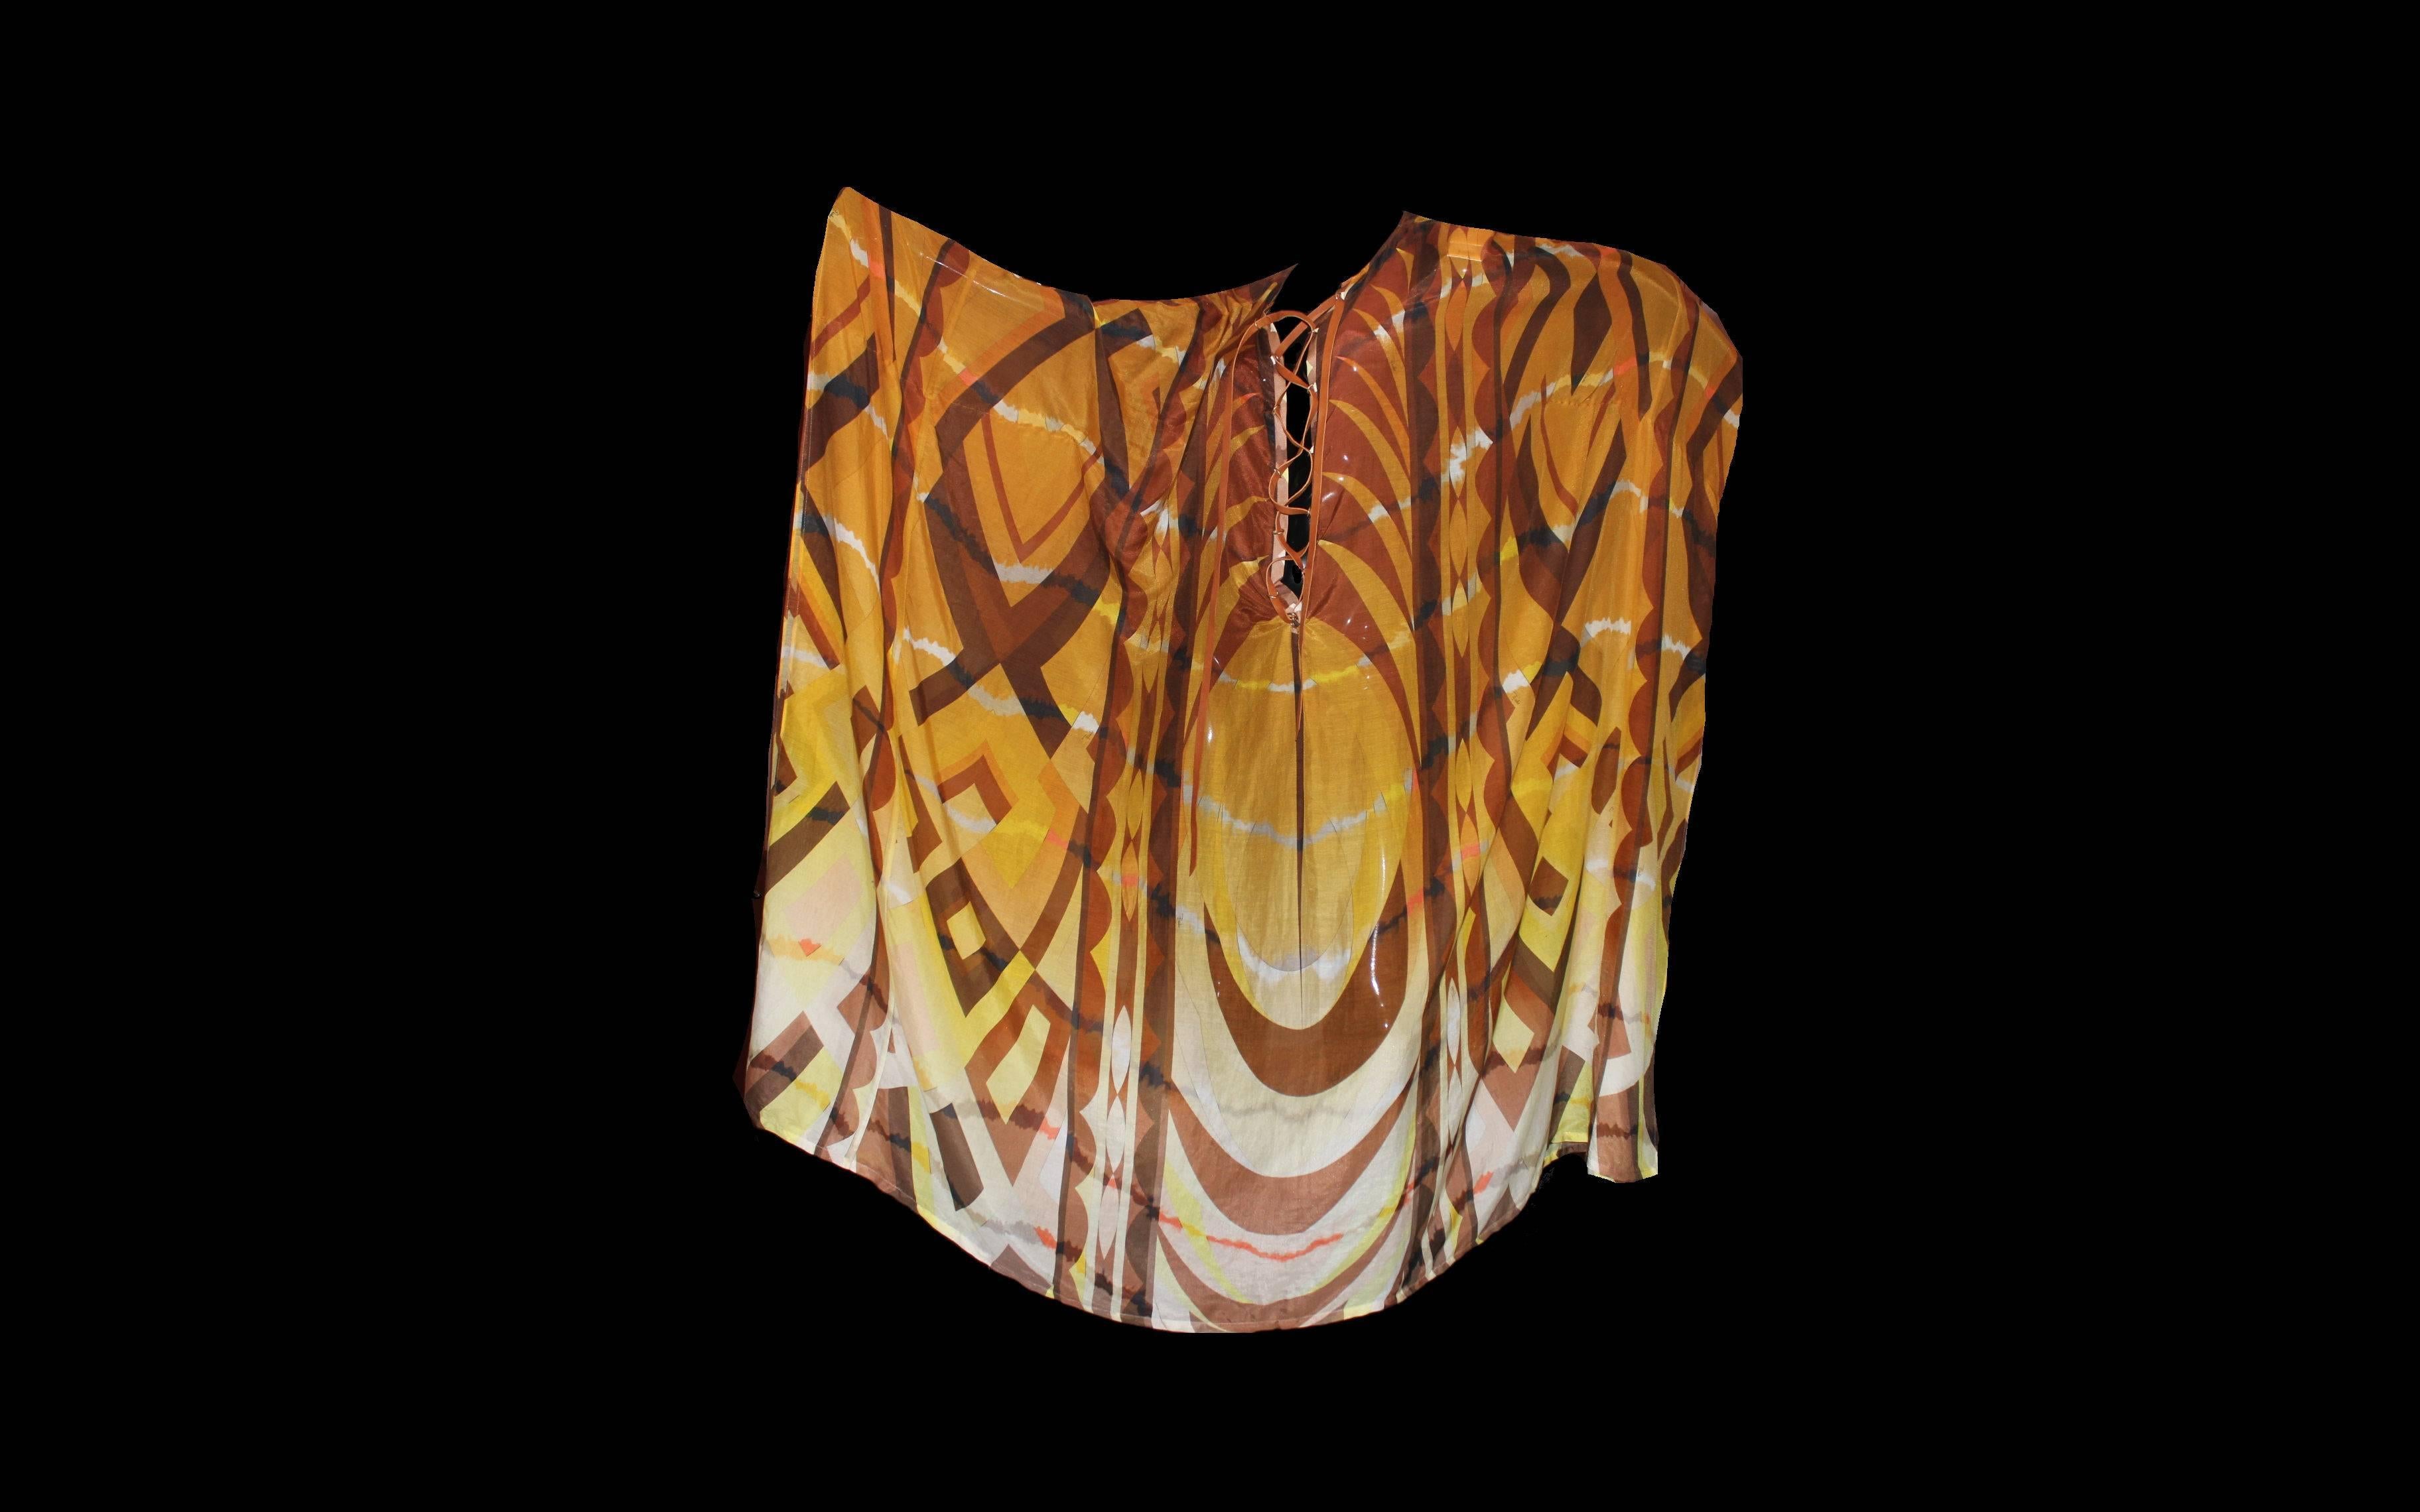 A stunning piece by Emilio Pucci
Maxi kaftan dress
Made of finest silk & cotton voile fabric
Signature print signed with "Emilio" all over
Leather lace up detail
Batwing sleeves
Made in Italy
